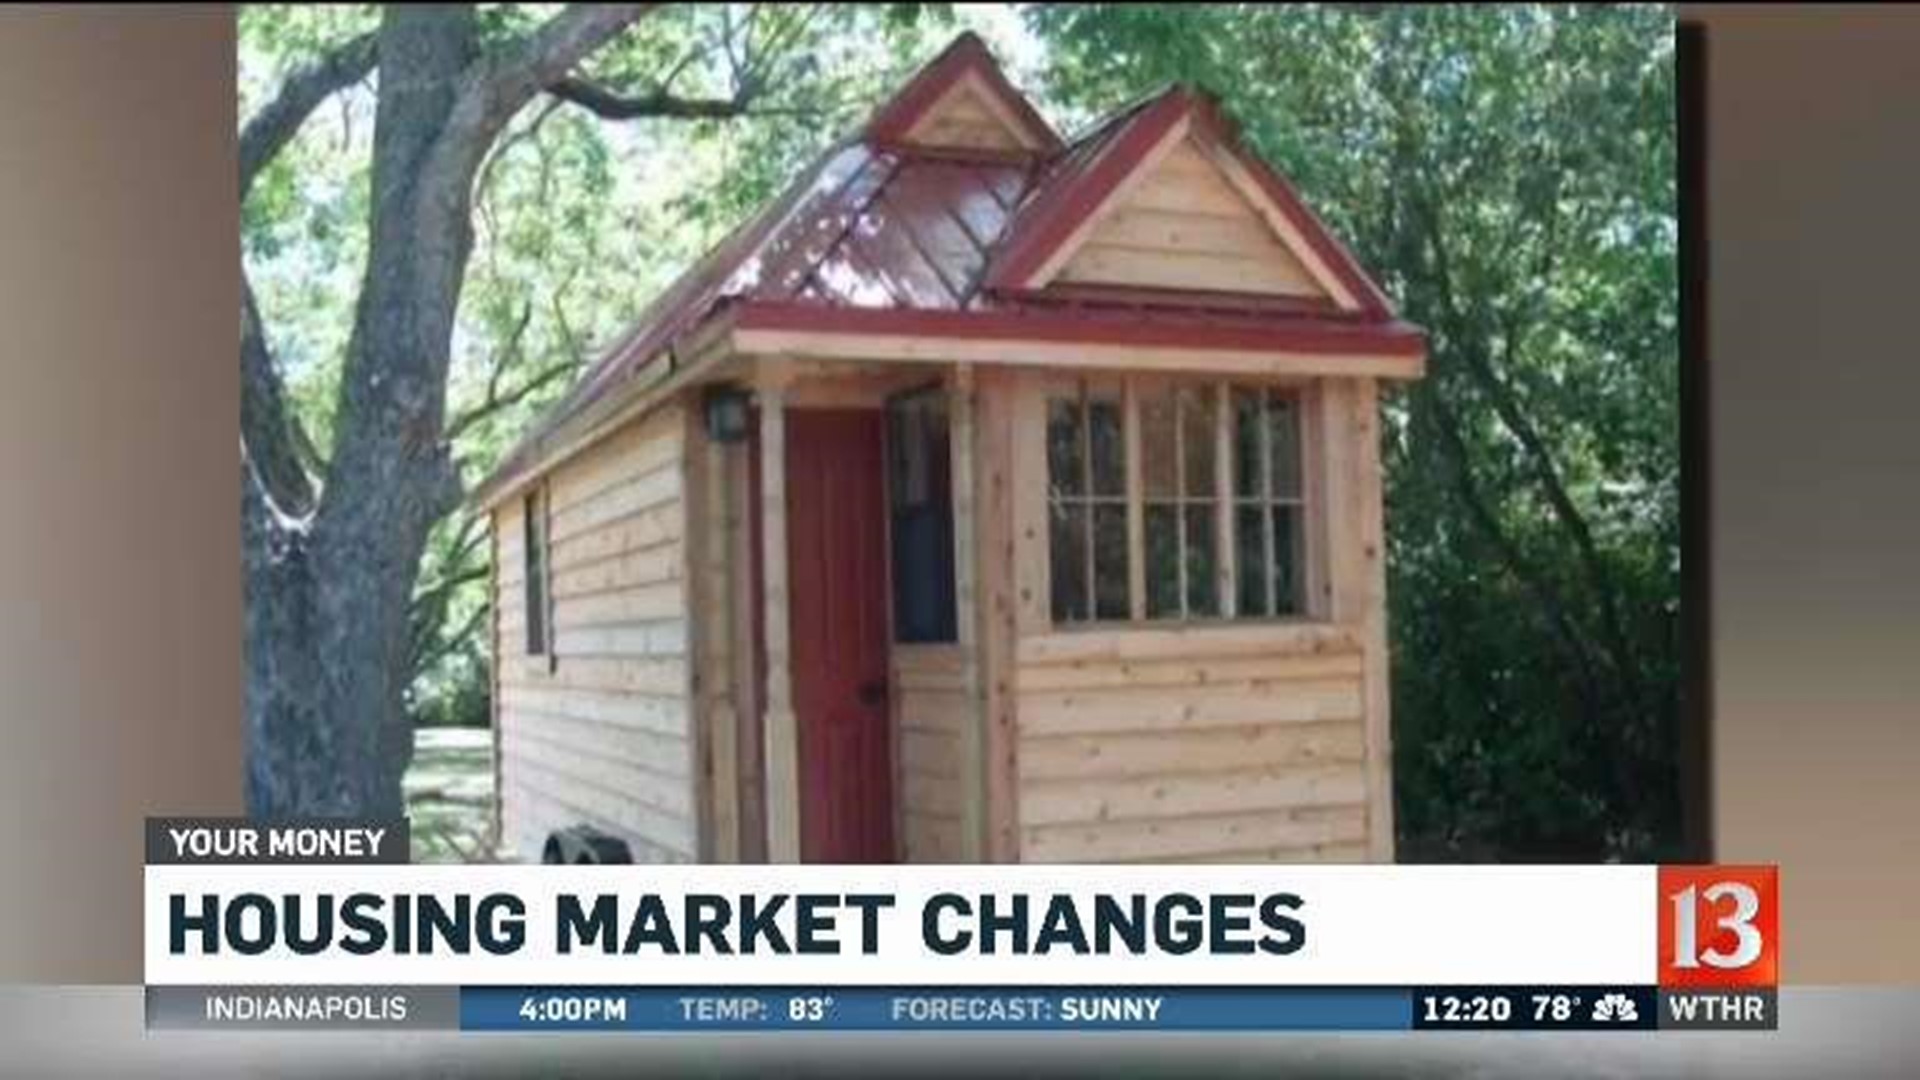 Changes in the housing market